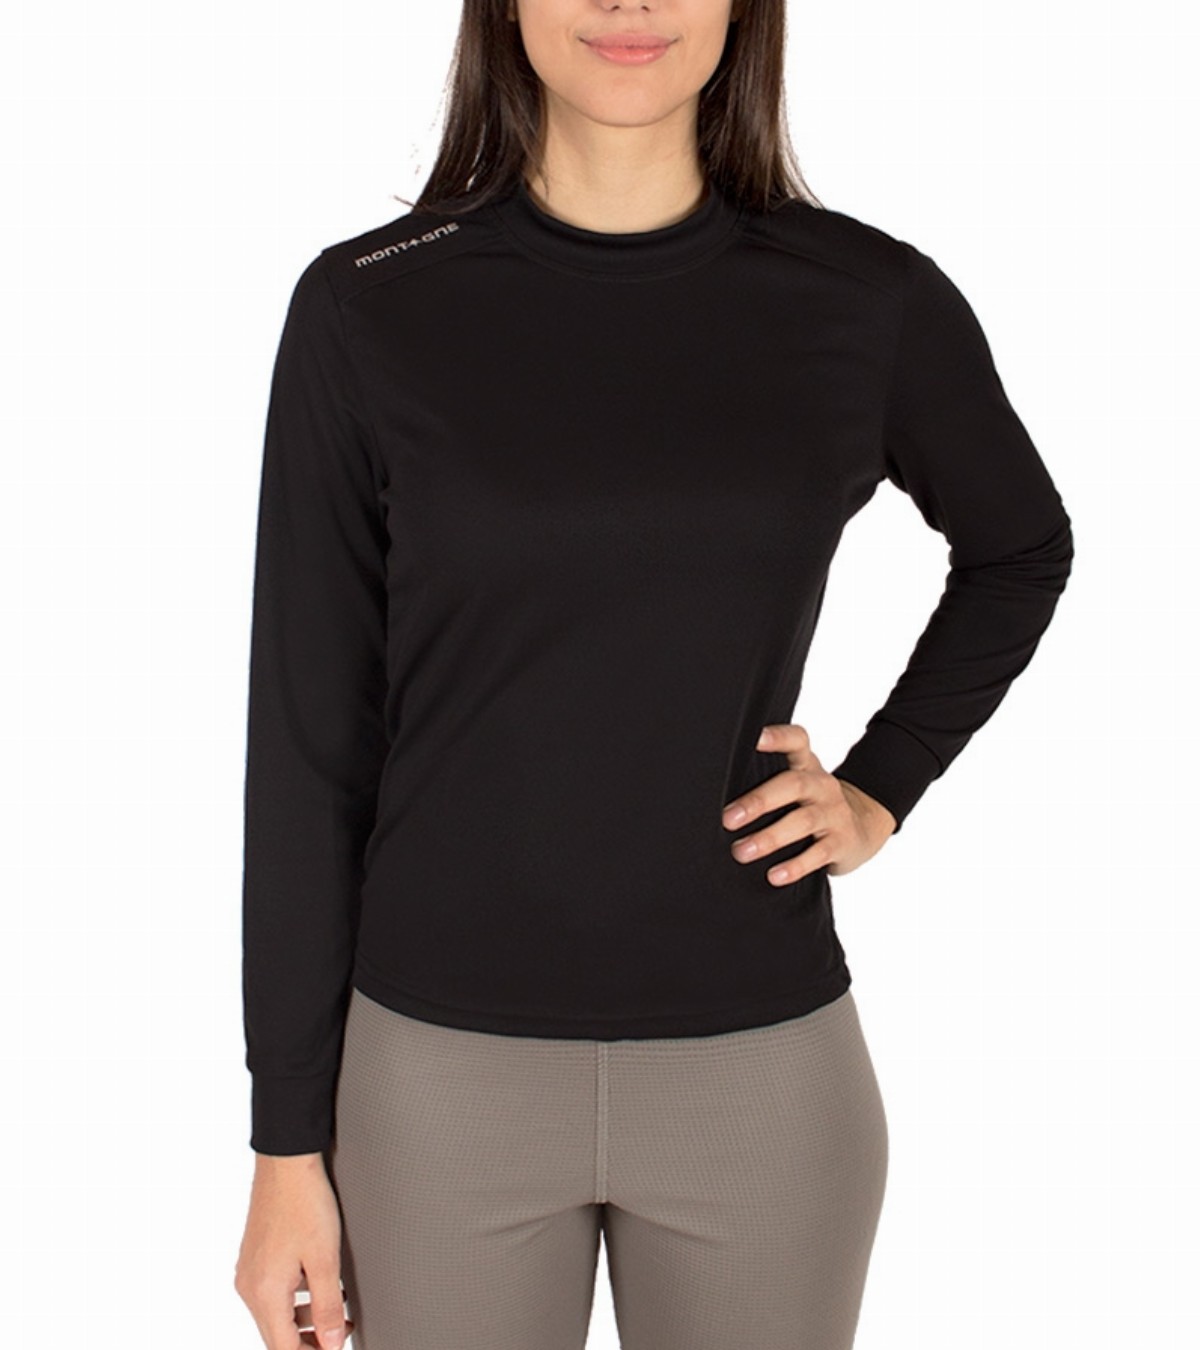 https://d368r8jqz0fwvm.cloudfront.net/13894-product_lg/camiseta-termica-de-mujer-olympia.jpg